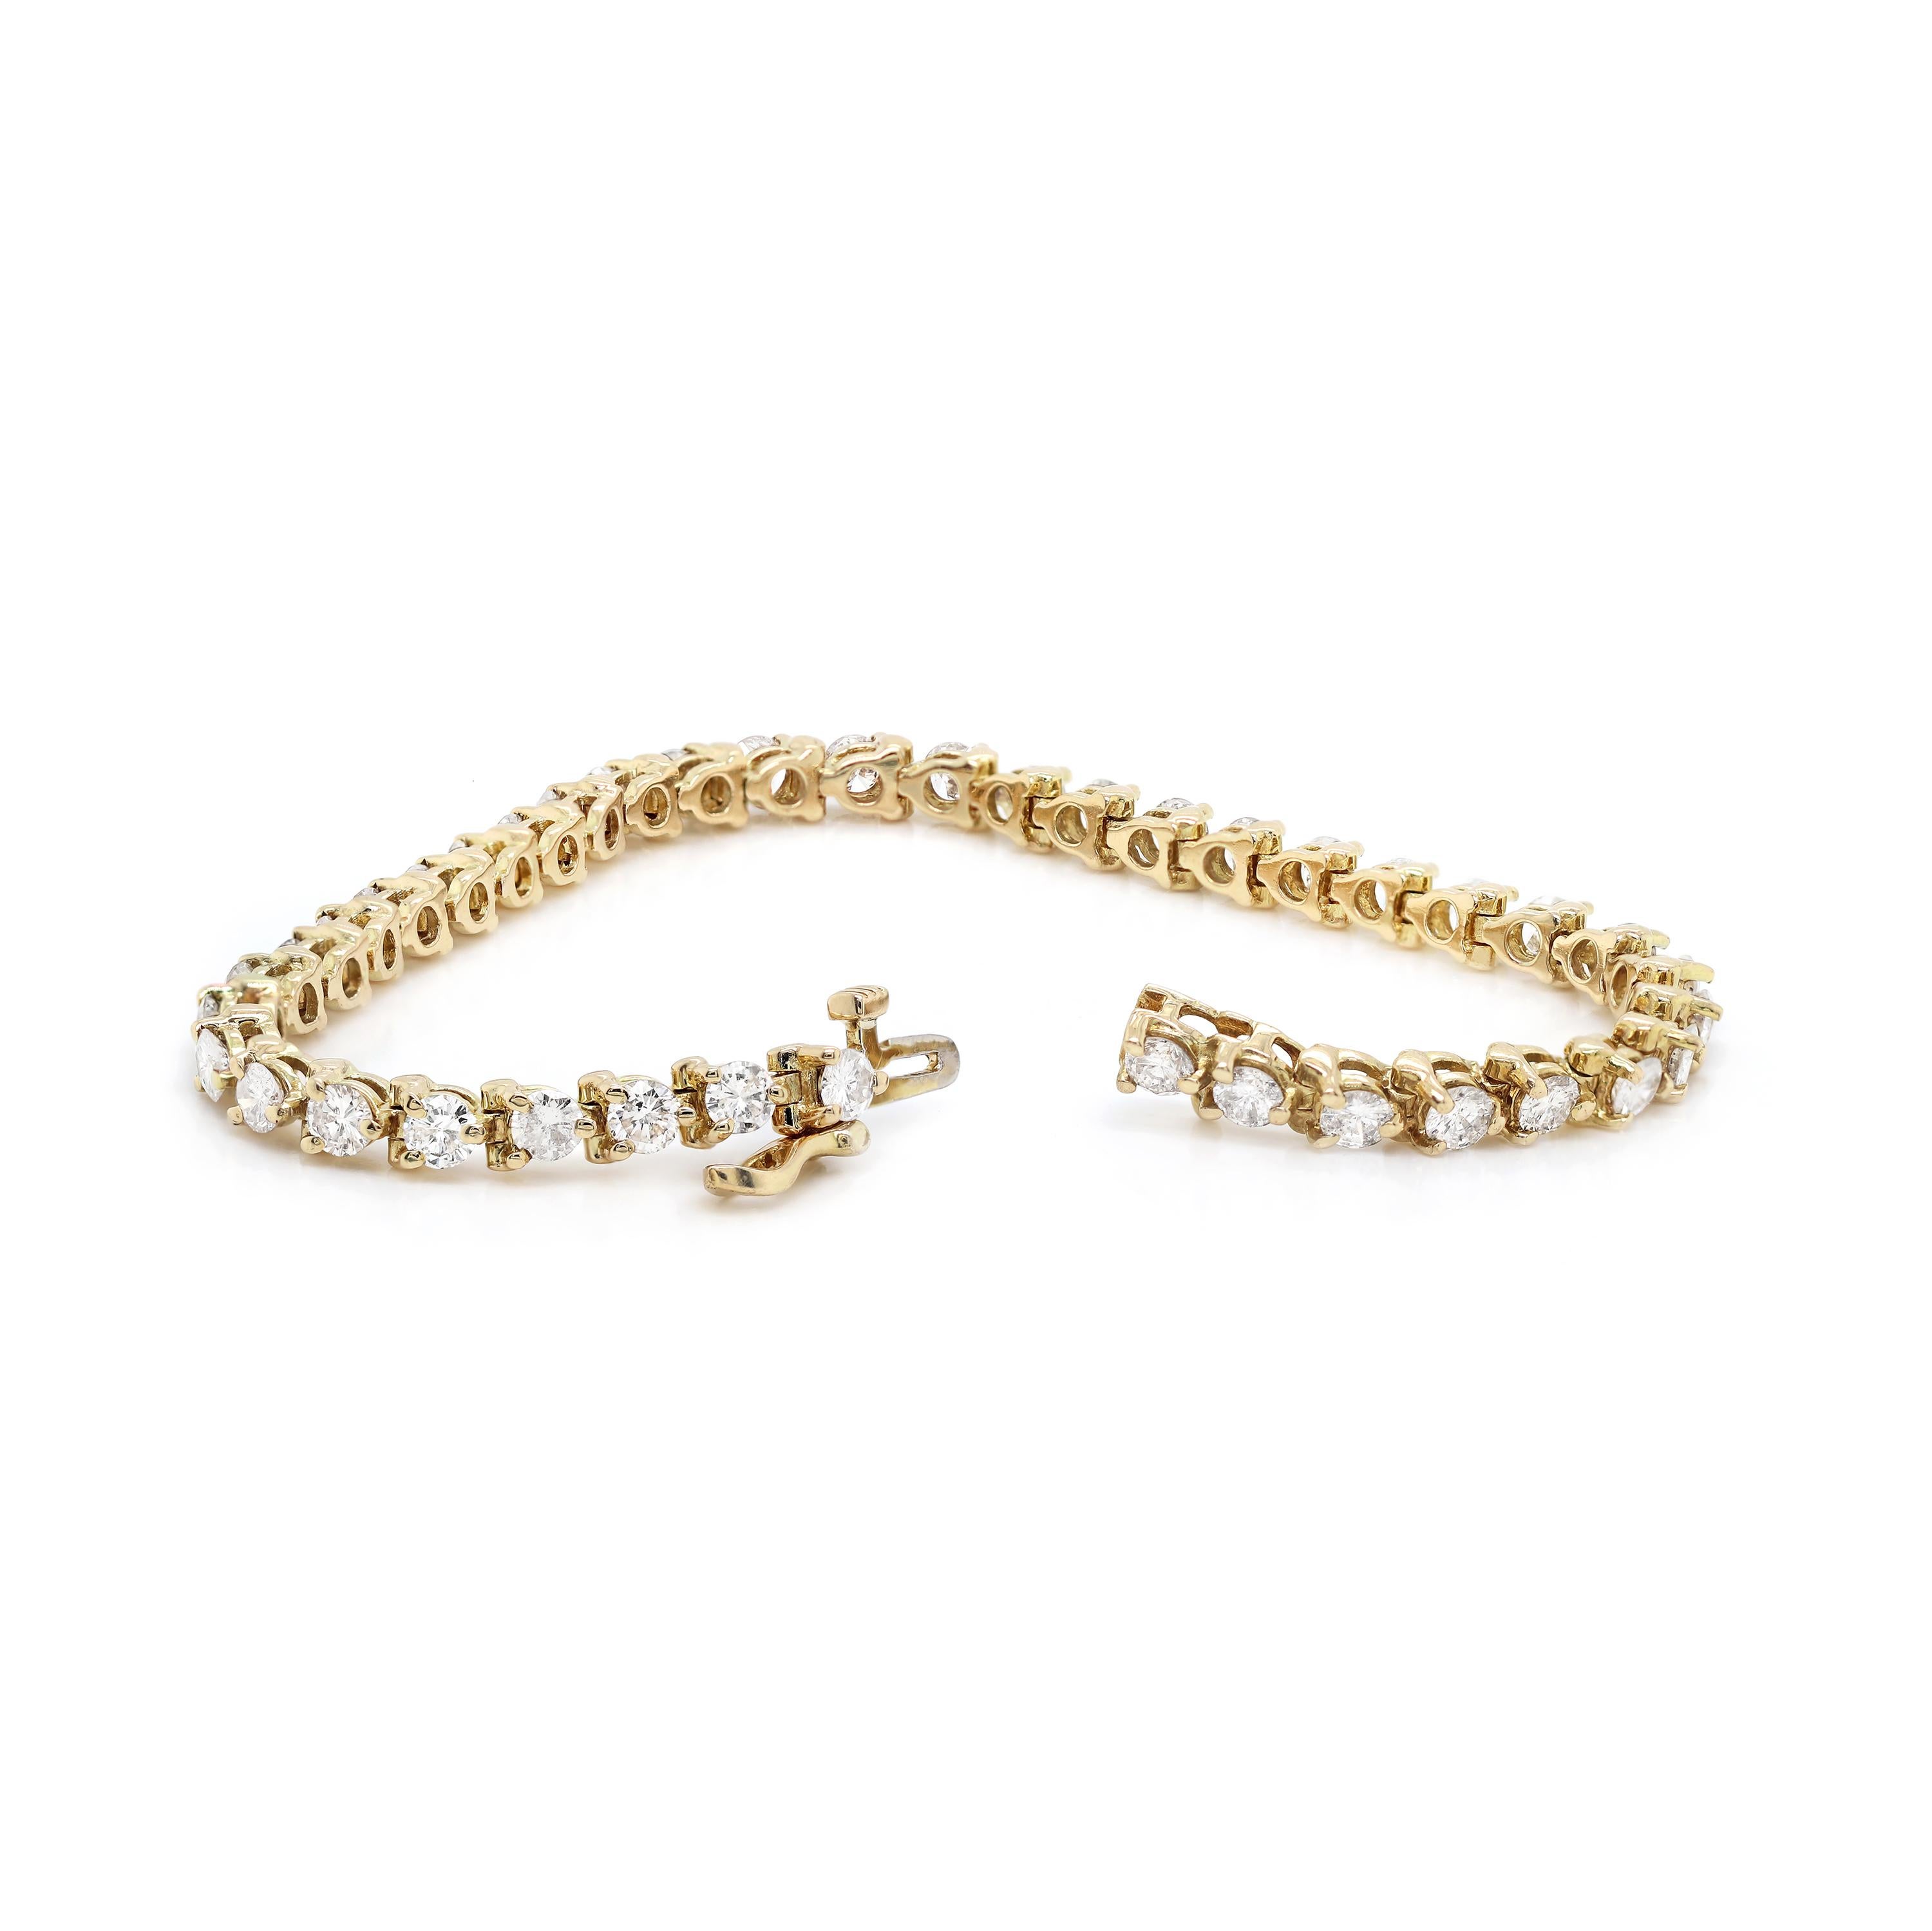 Beautiful tennis bracelet featuring 40 round brilliant cut diamonds mounted in three claw, open back settings. The diamonds weight an approximate total weight of 5.00ct, all mounted in 14 carat yellow gold. This timelessly elegant bracelet measures